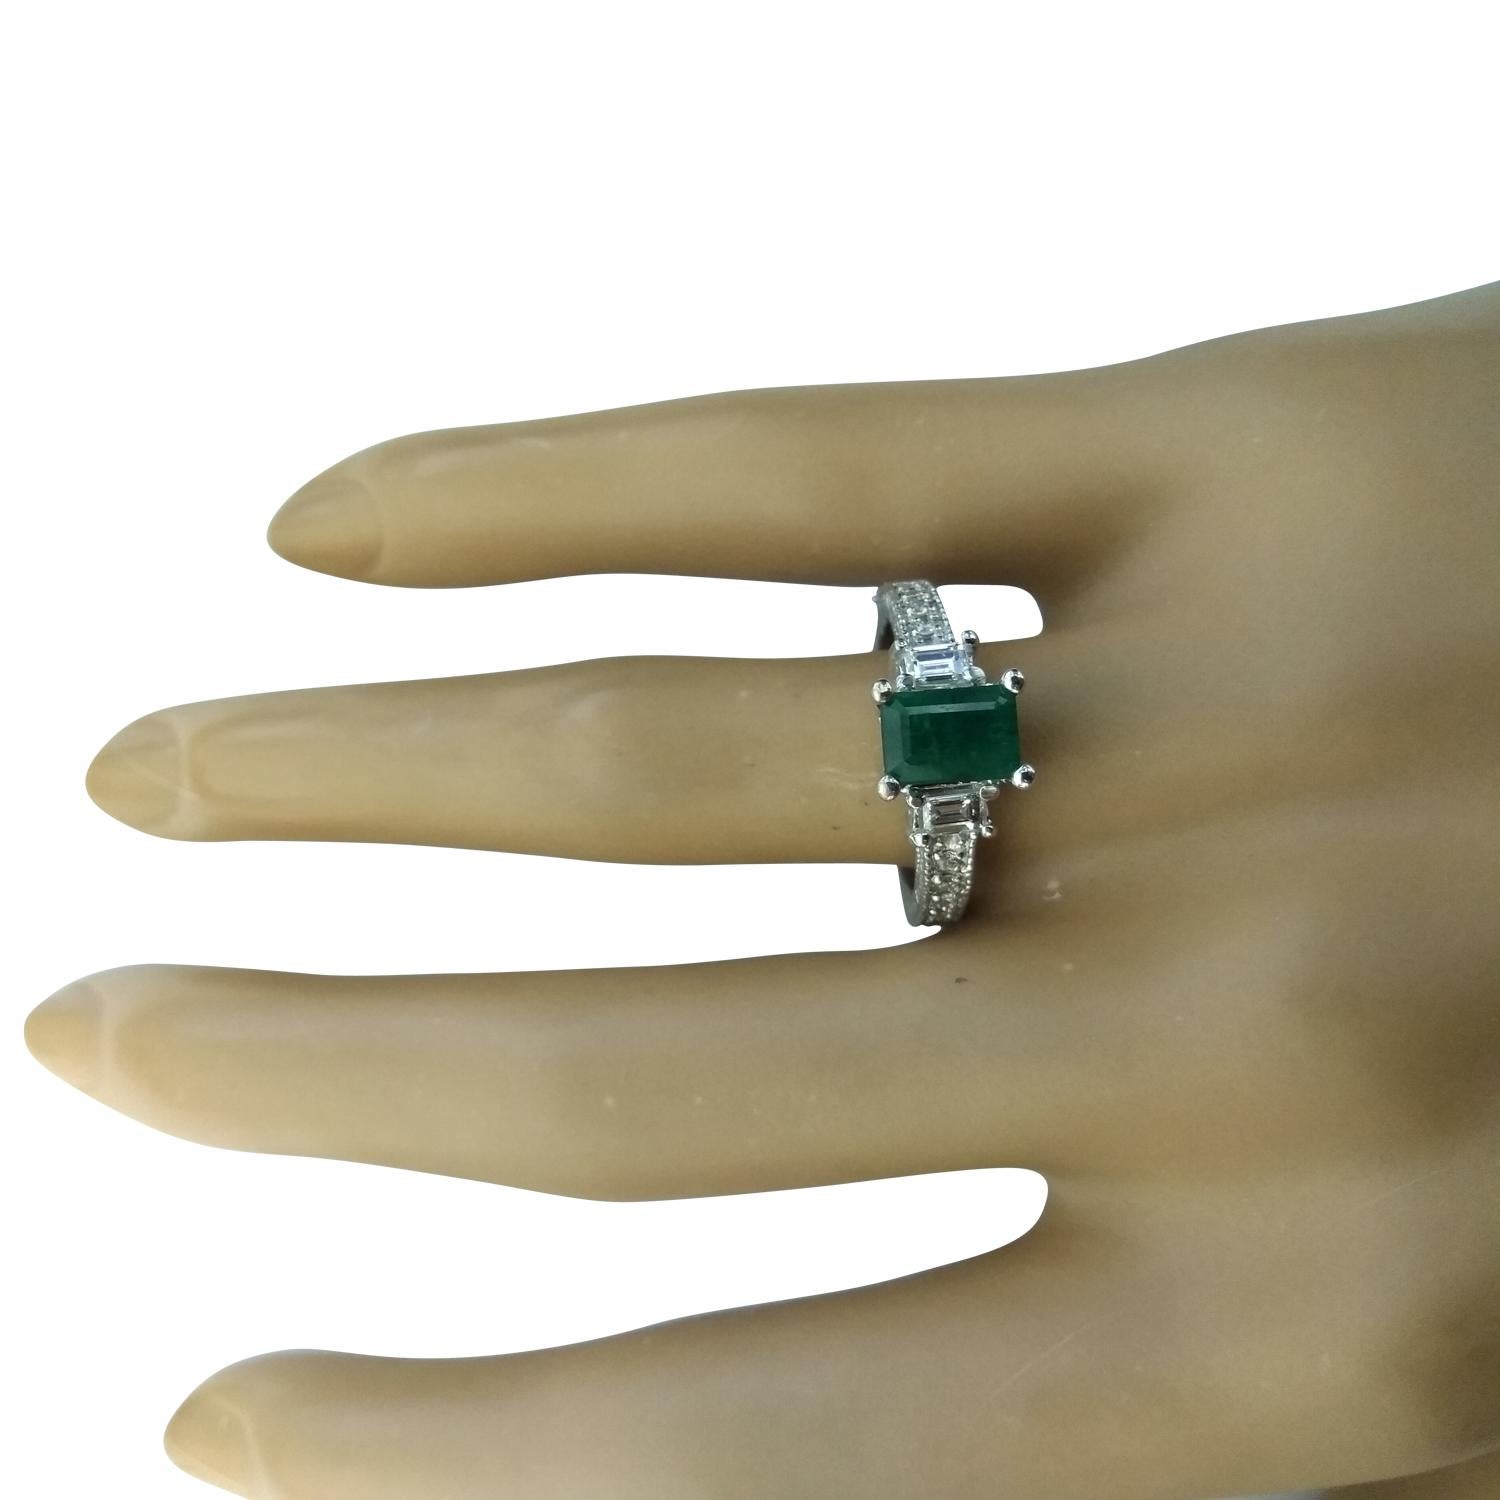 1.50 Carat Natural Emerald 14 Karat Solid White Gold Diamond Ring
Stamped: 14K
Total Ring Weight: 6 Grams 
Emerald Weight 1.20 Carat (7.00x5.00 Millimeters)
Diamond Weight: 0.30 carat (F-G Color, VS2-SI1 Clarity )
Face Measures: 7.00 Millimeter